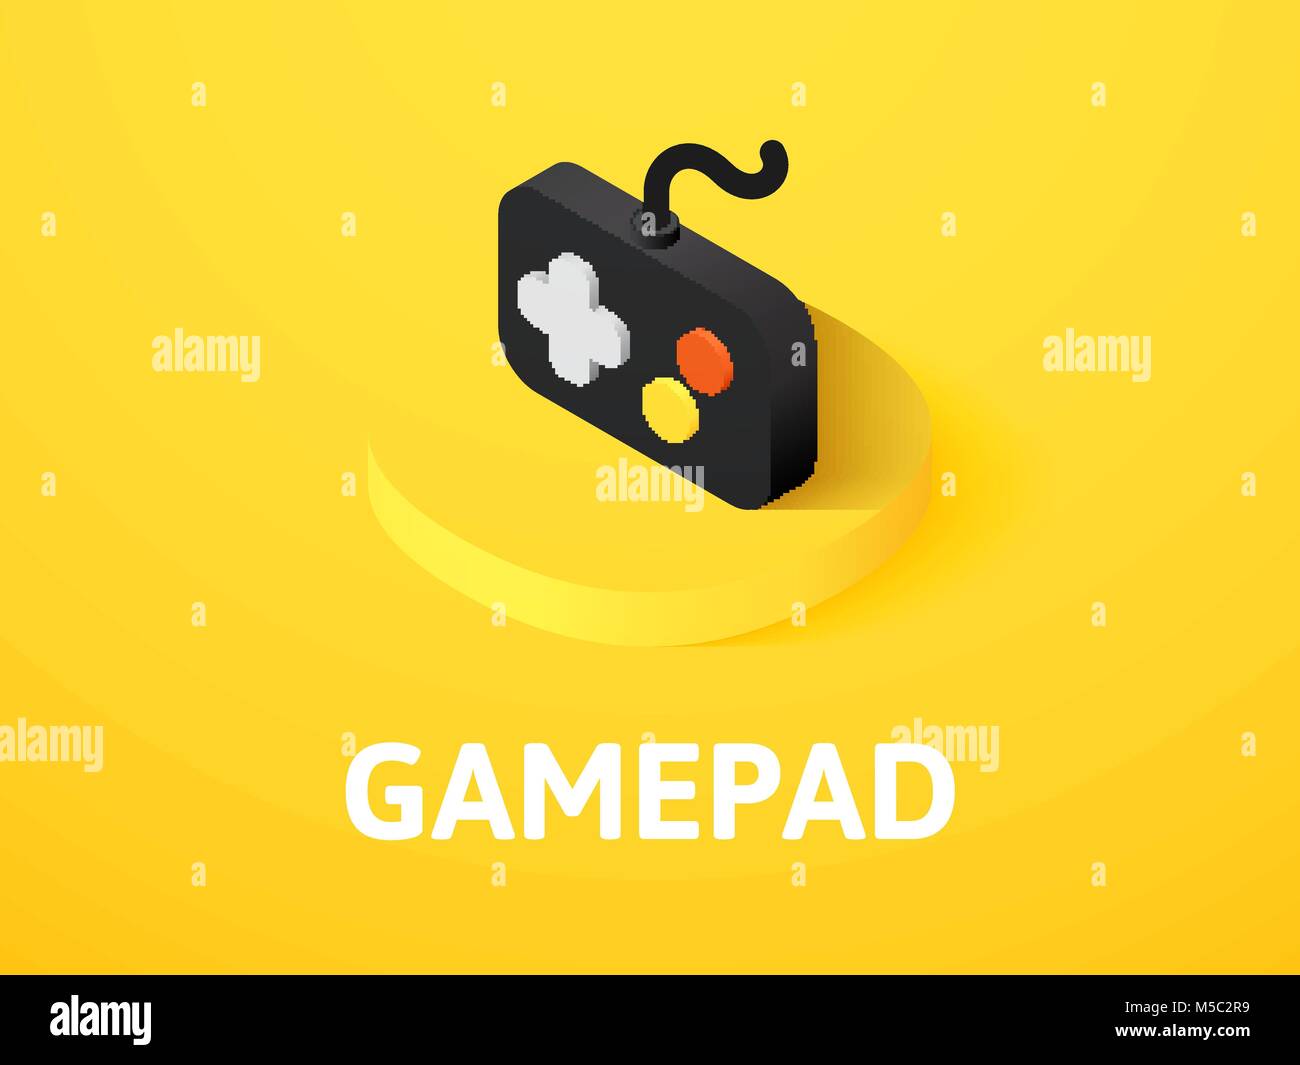 Gamepad isometric icon, isolated on color background Stock Vector